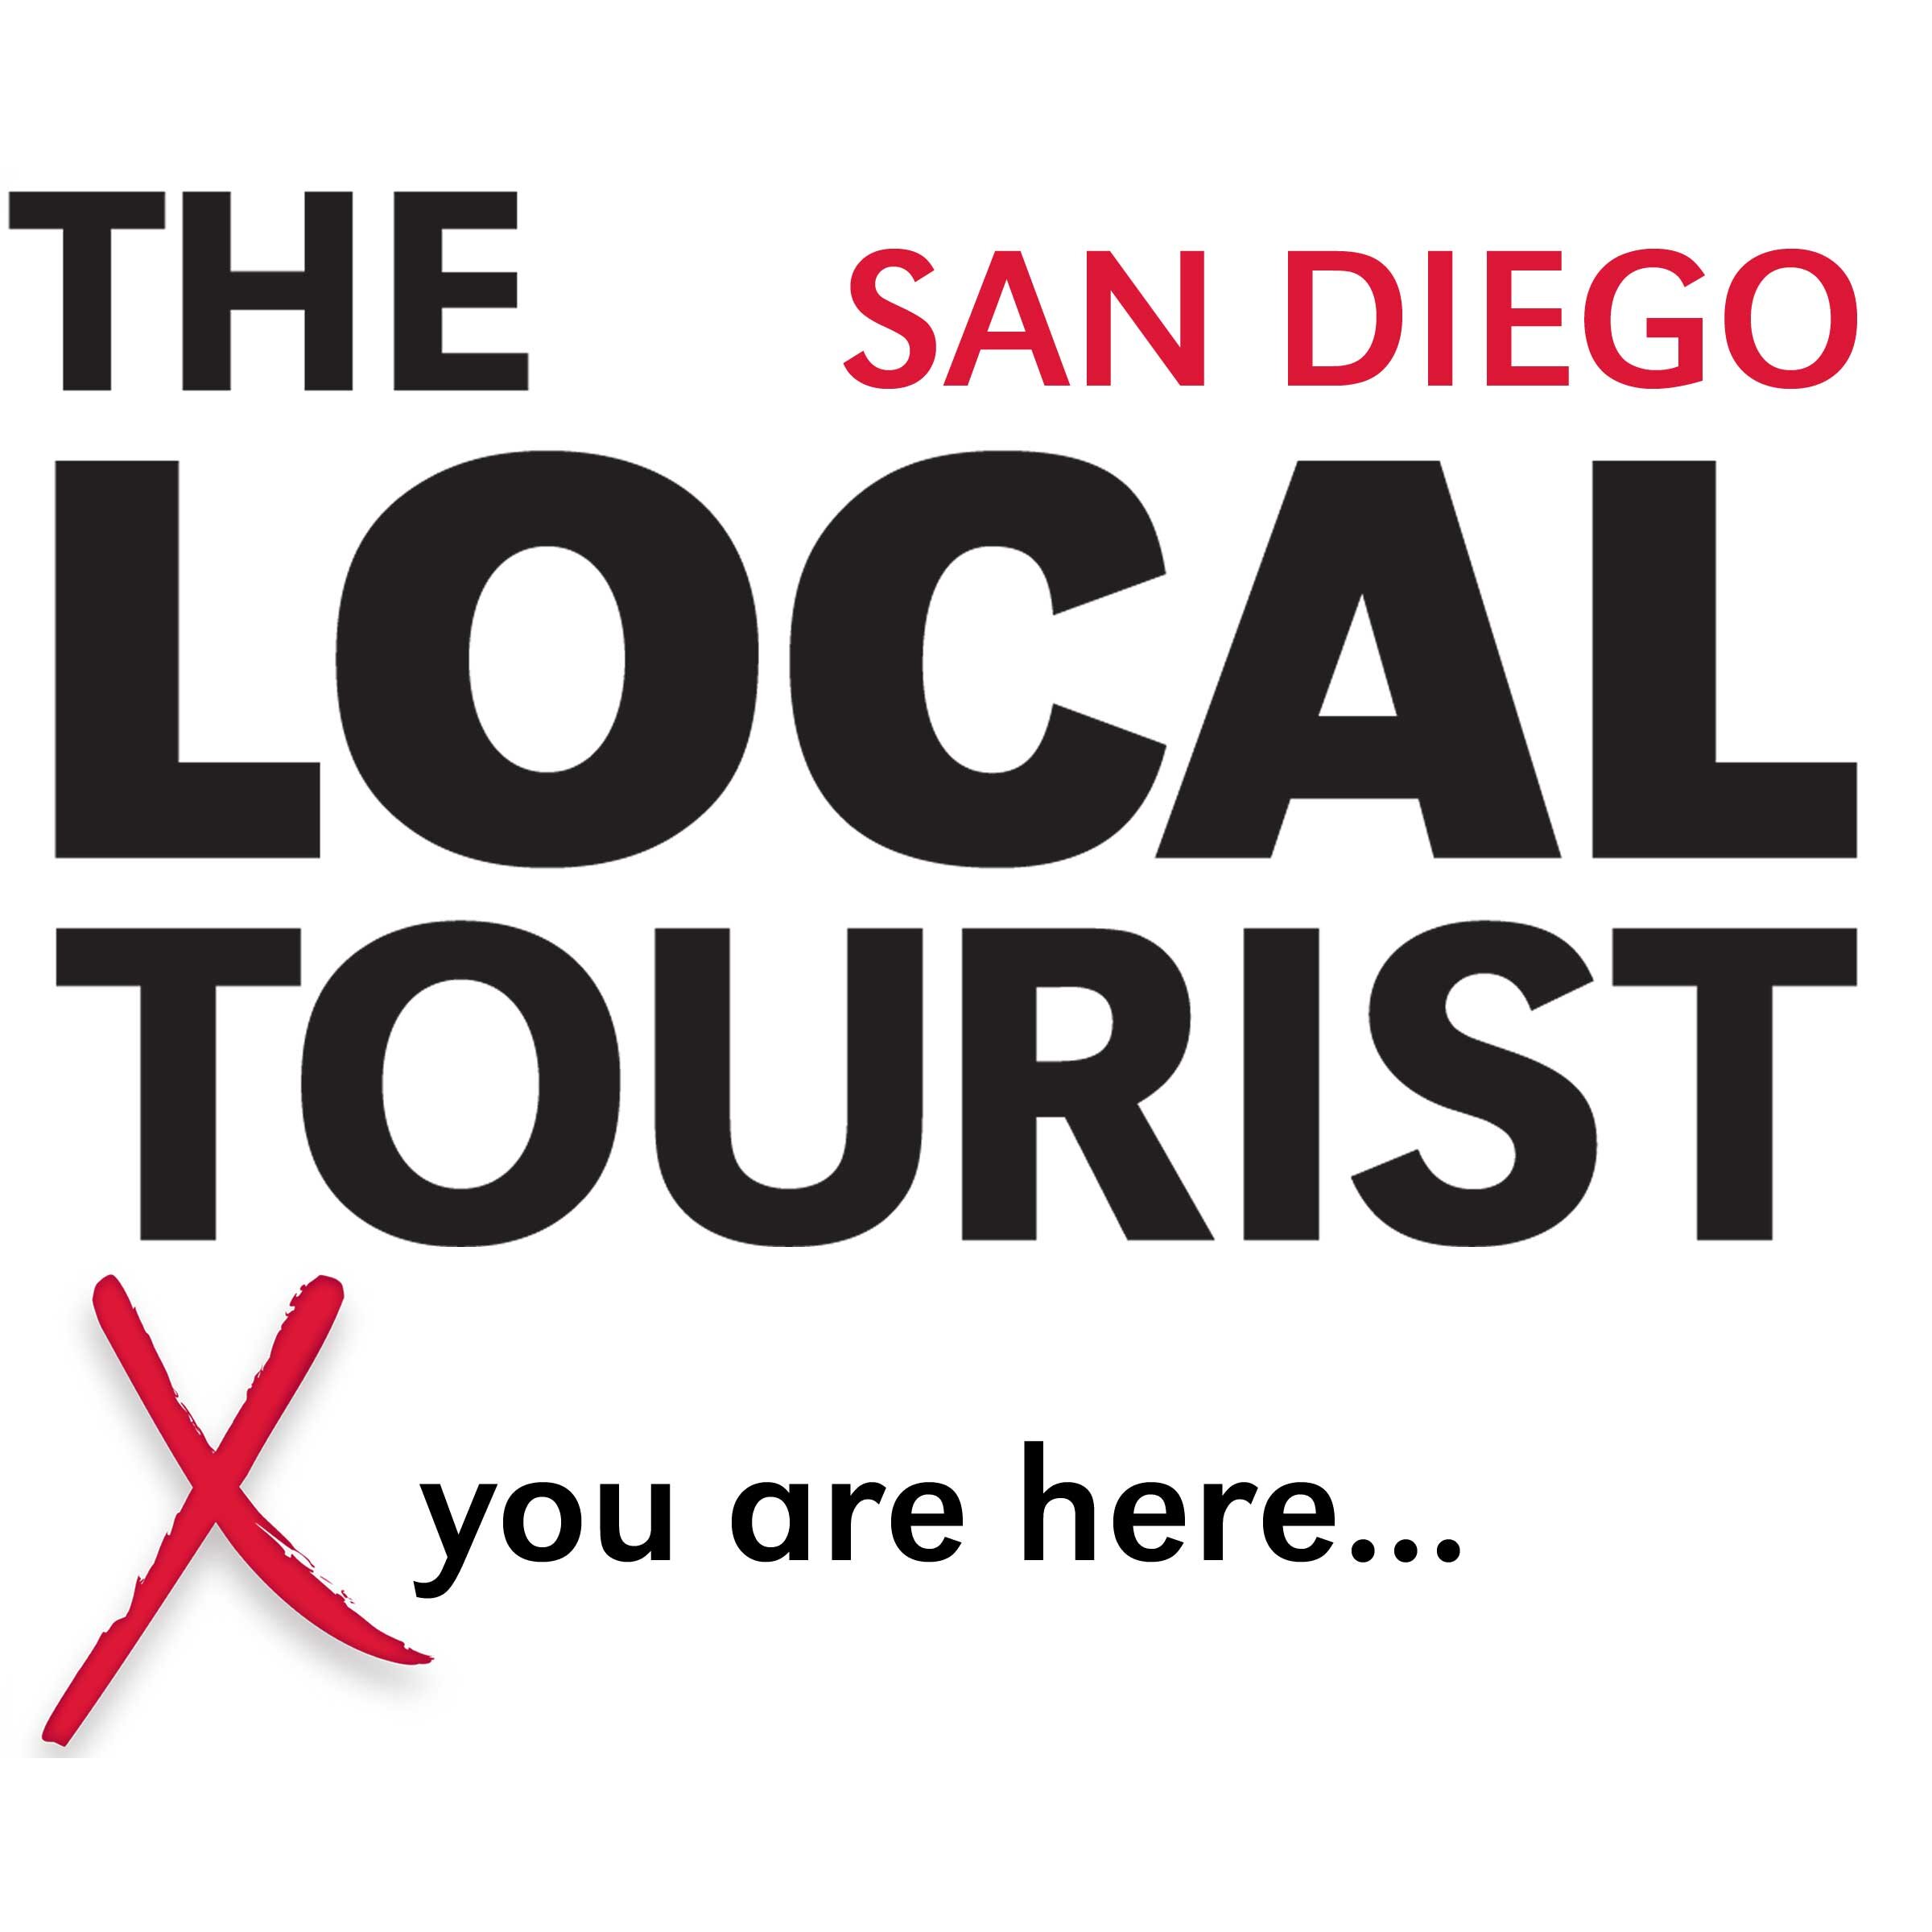 Everything you want to know in San Diego. Follow #TLTSD for events, food & drink, shopping, things to do and more. Follow all TLT cities @thelocaltourist